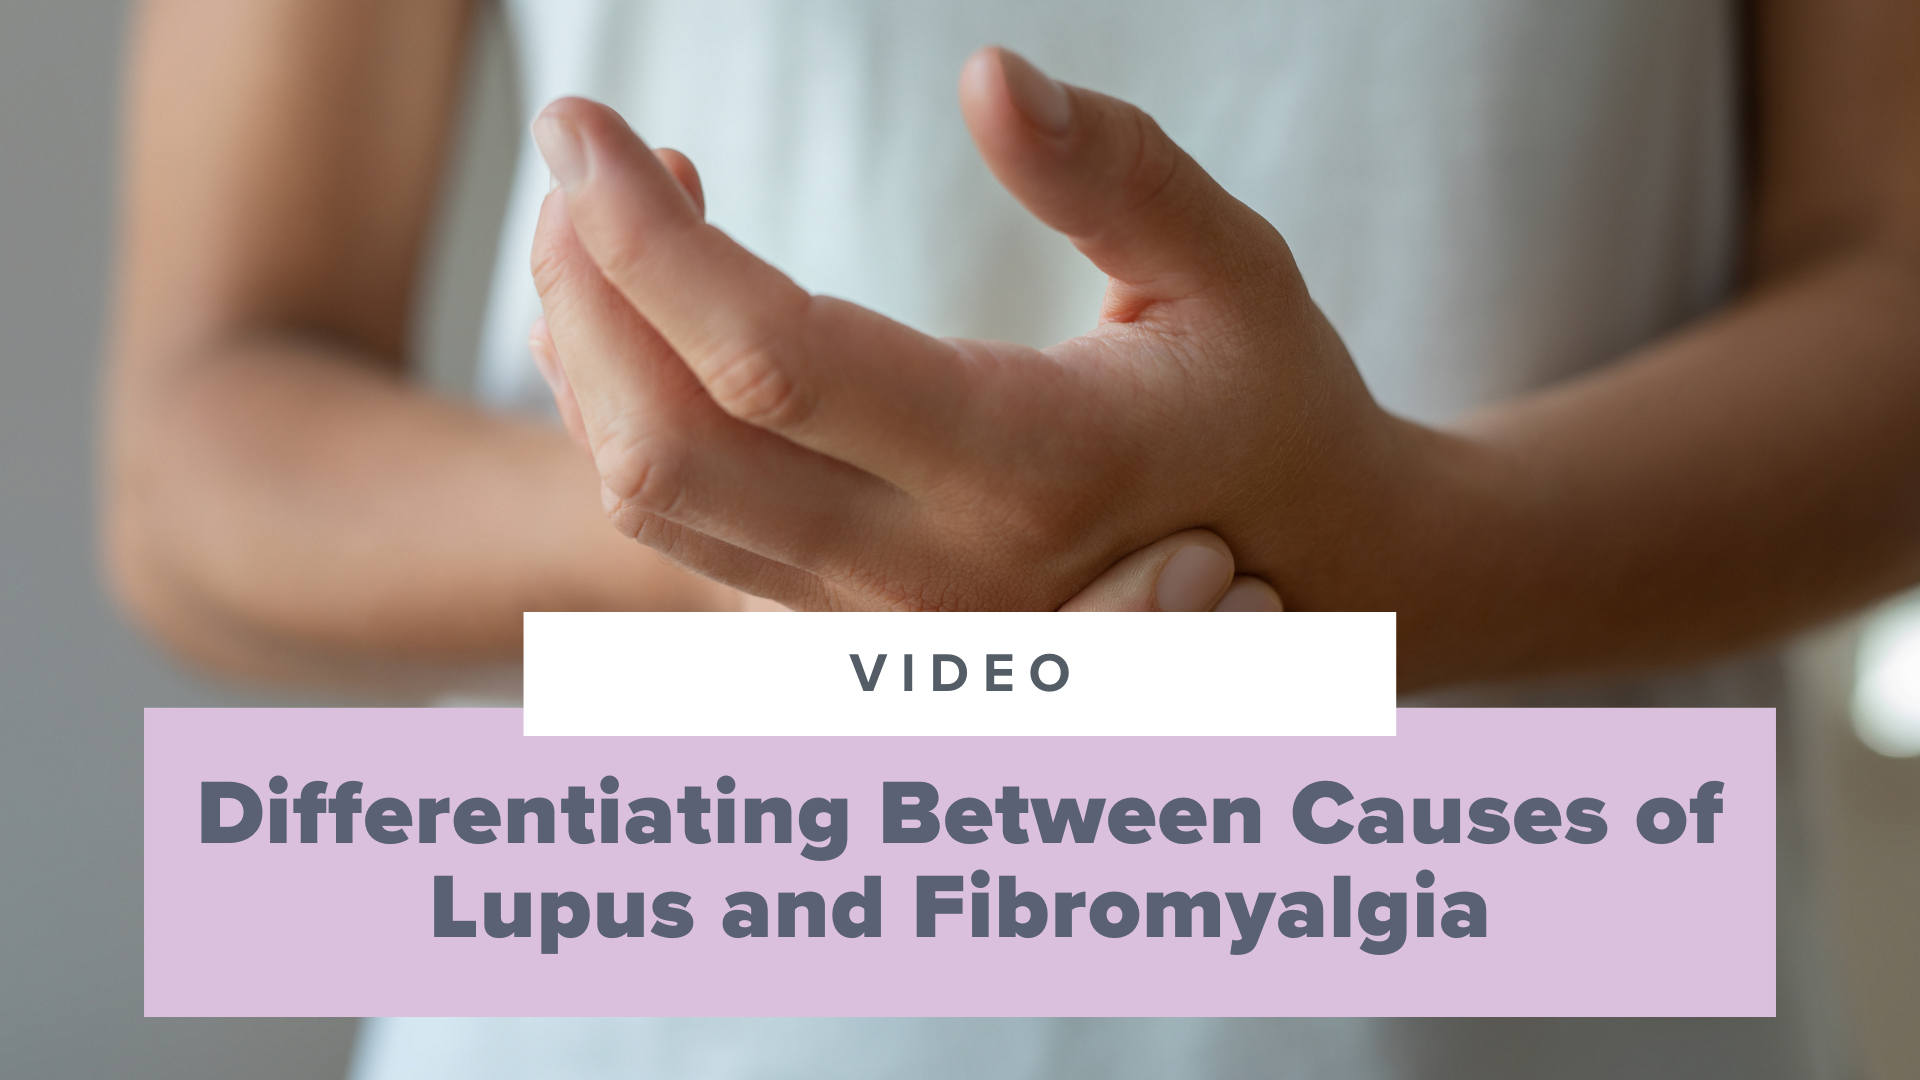 SMNP Blog - Understanding Lupus vs Fibromyalgia: Differentiating Between Causes of Pain and Fatigue